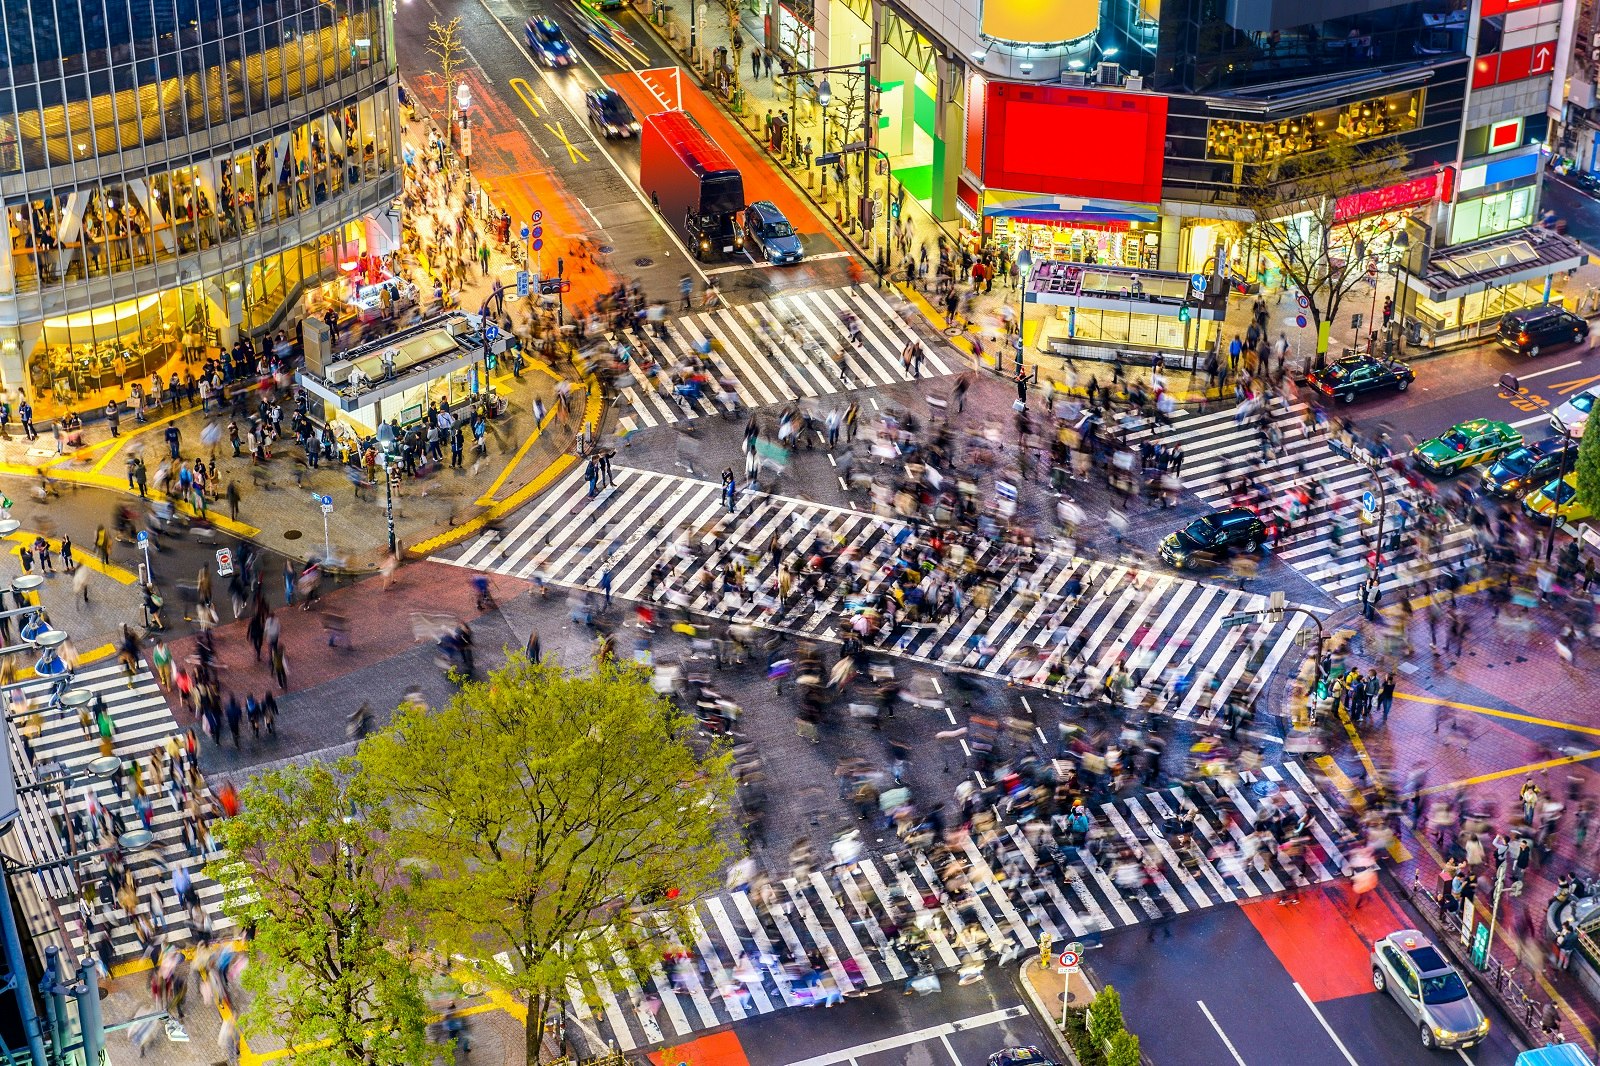 Hundreds of people using Shibuya Crossing in Tokyo, one of the busiest crosswalks in the world. The photo is taken at dusk and is a long exposure shot, so the people are a little bit blurred by movement